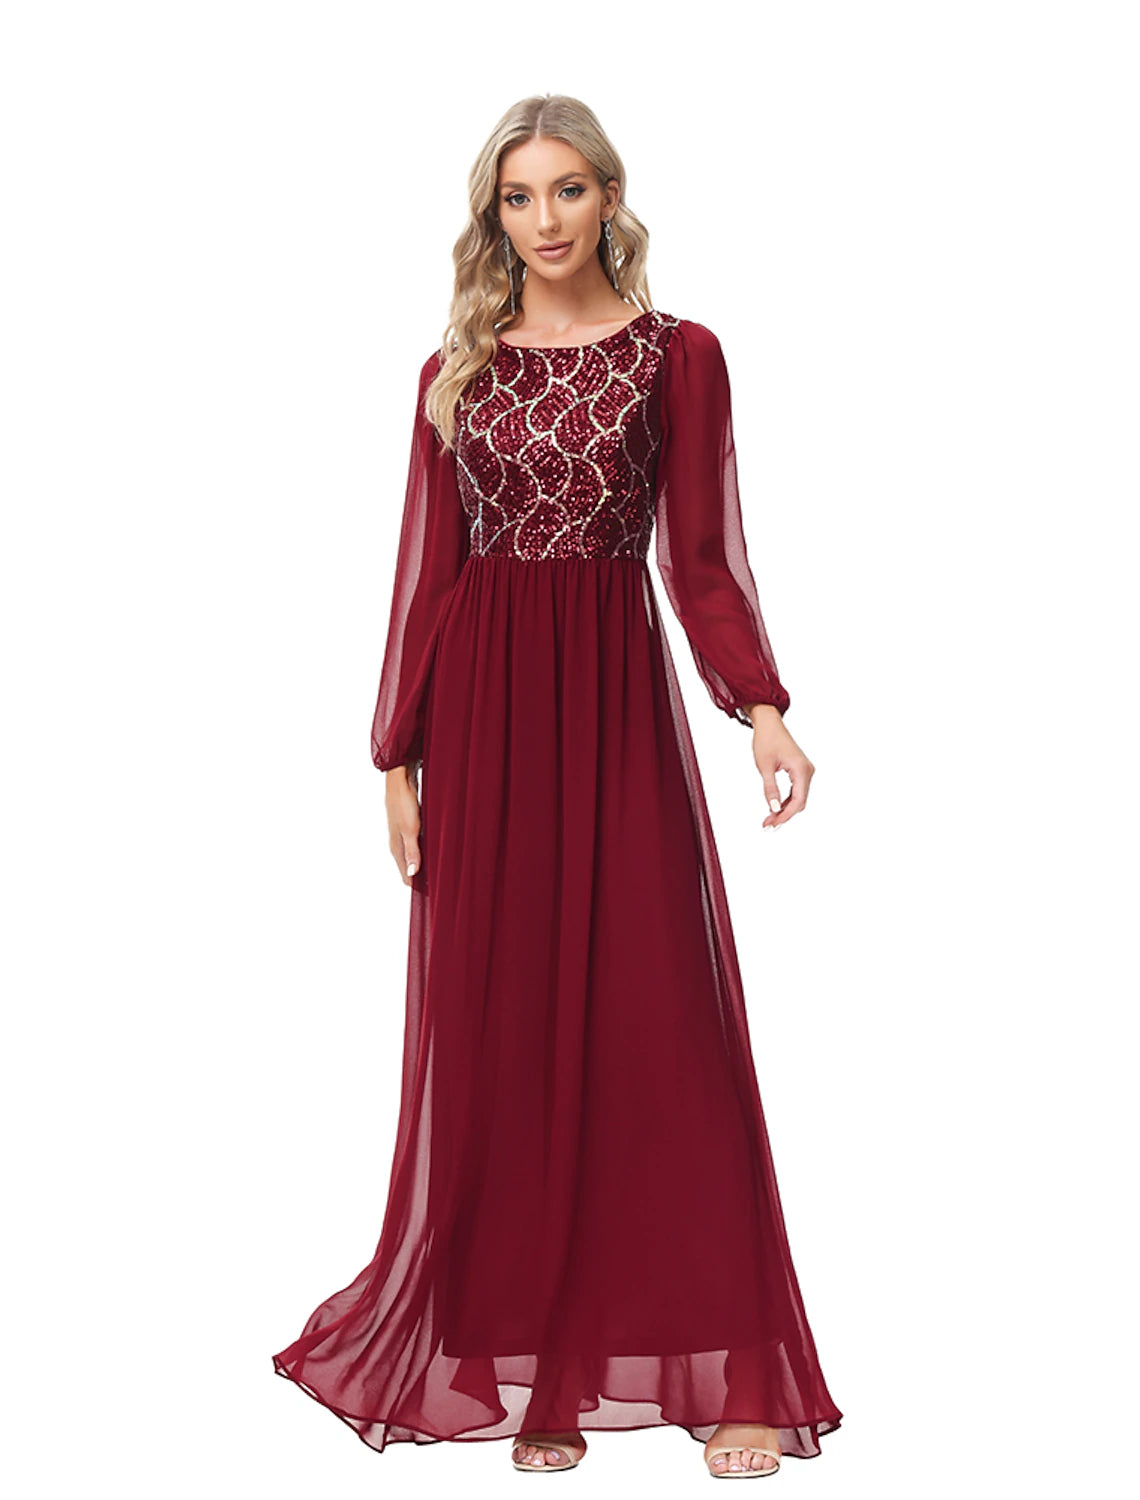 A-Line Evening Gown Empire Dress Party Wear Floor Length Long Sleeve Jewel Neck Chiffon V Back with Sequin Splicing